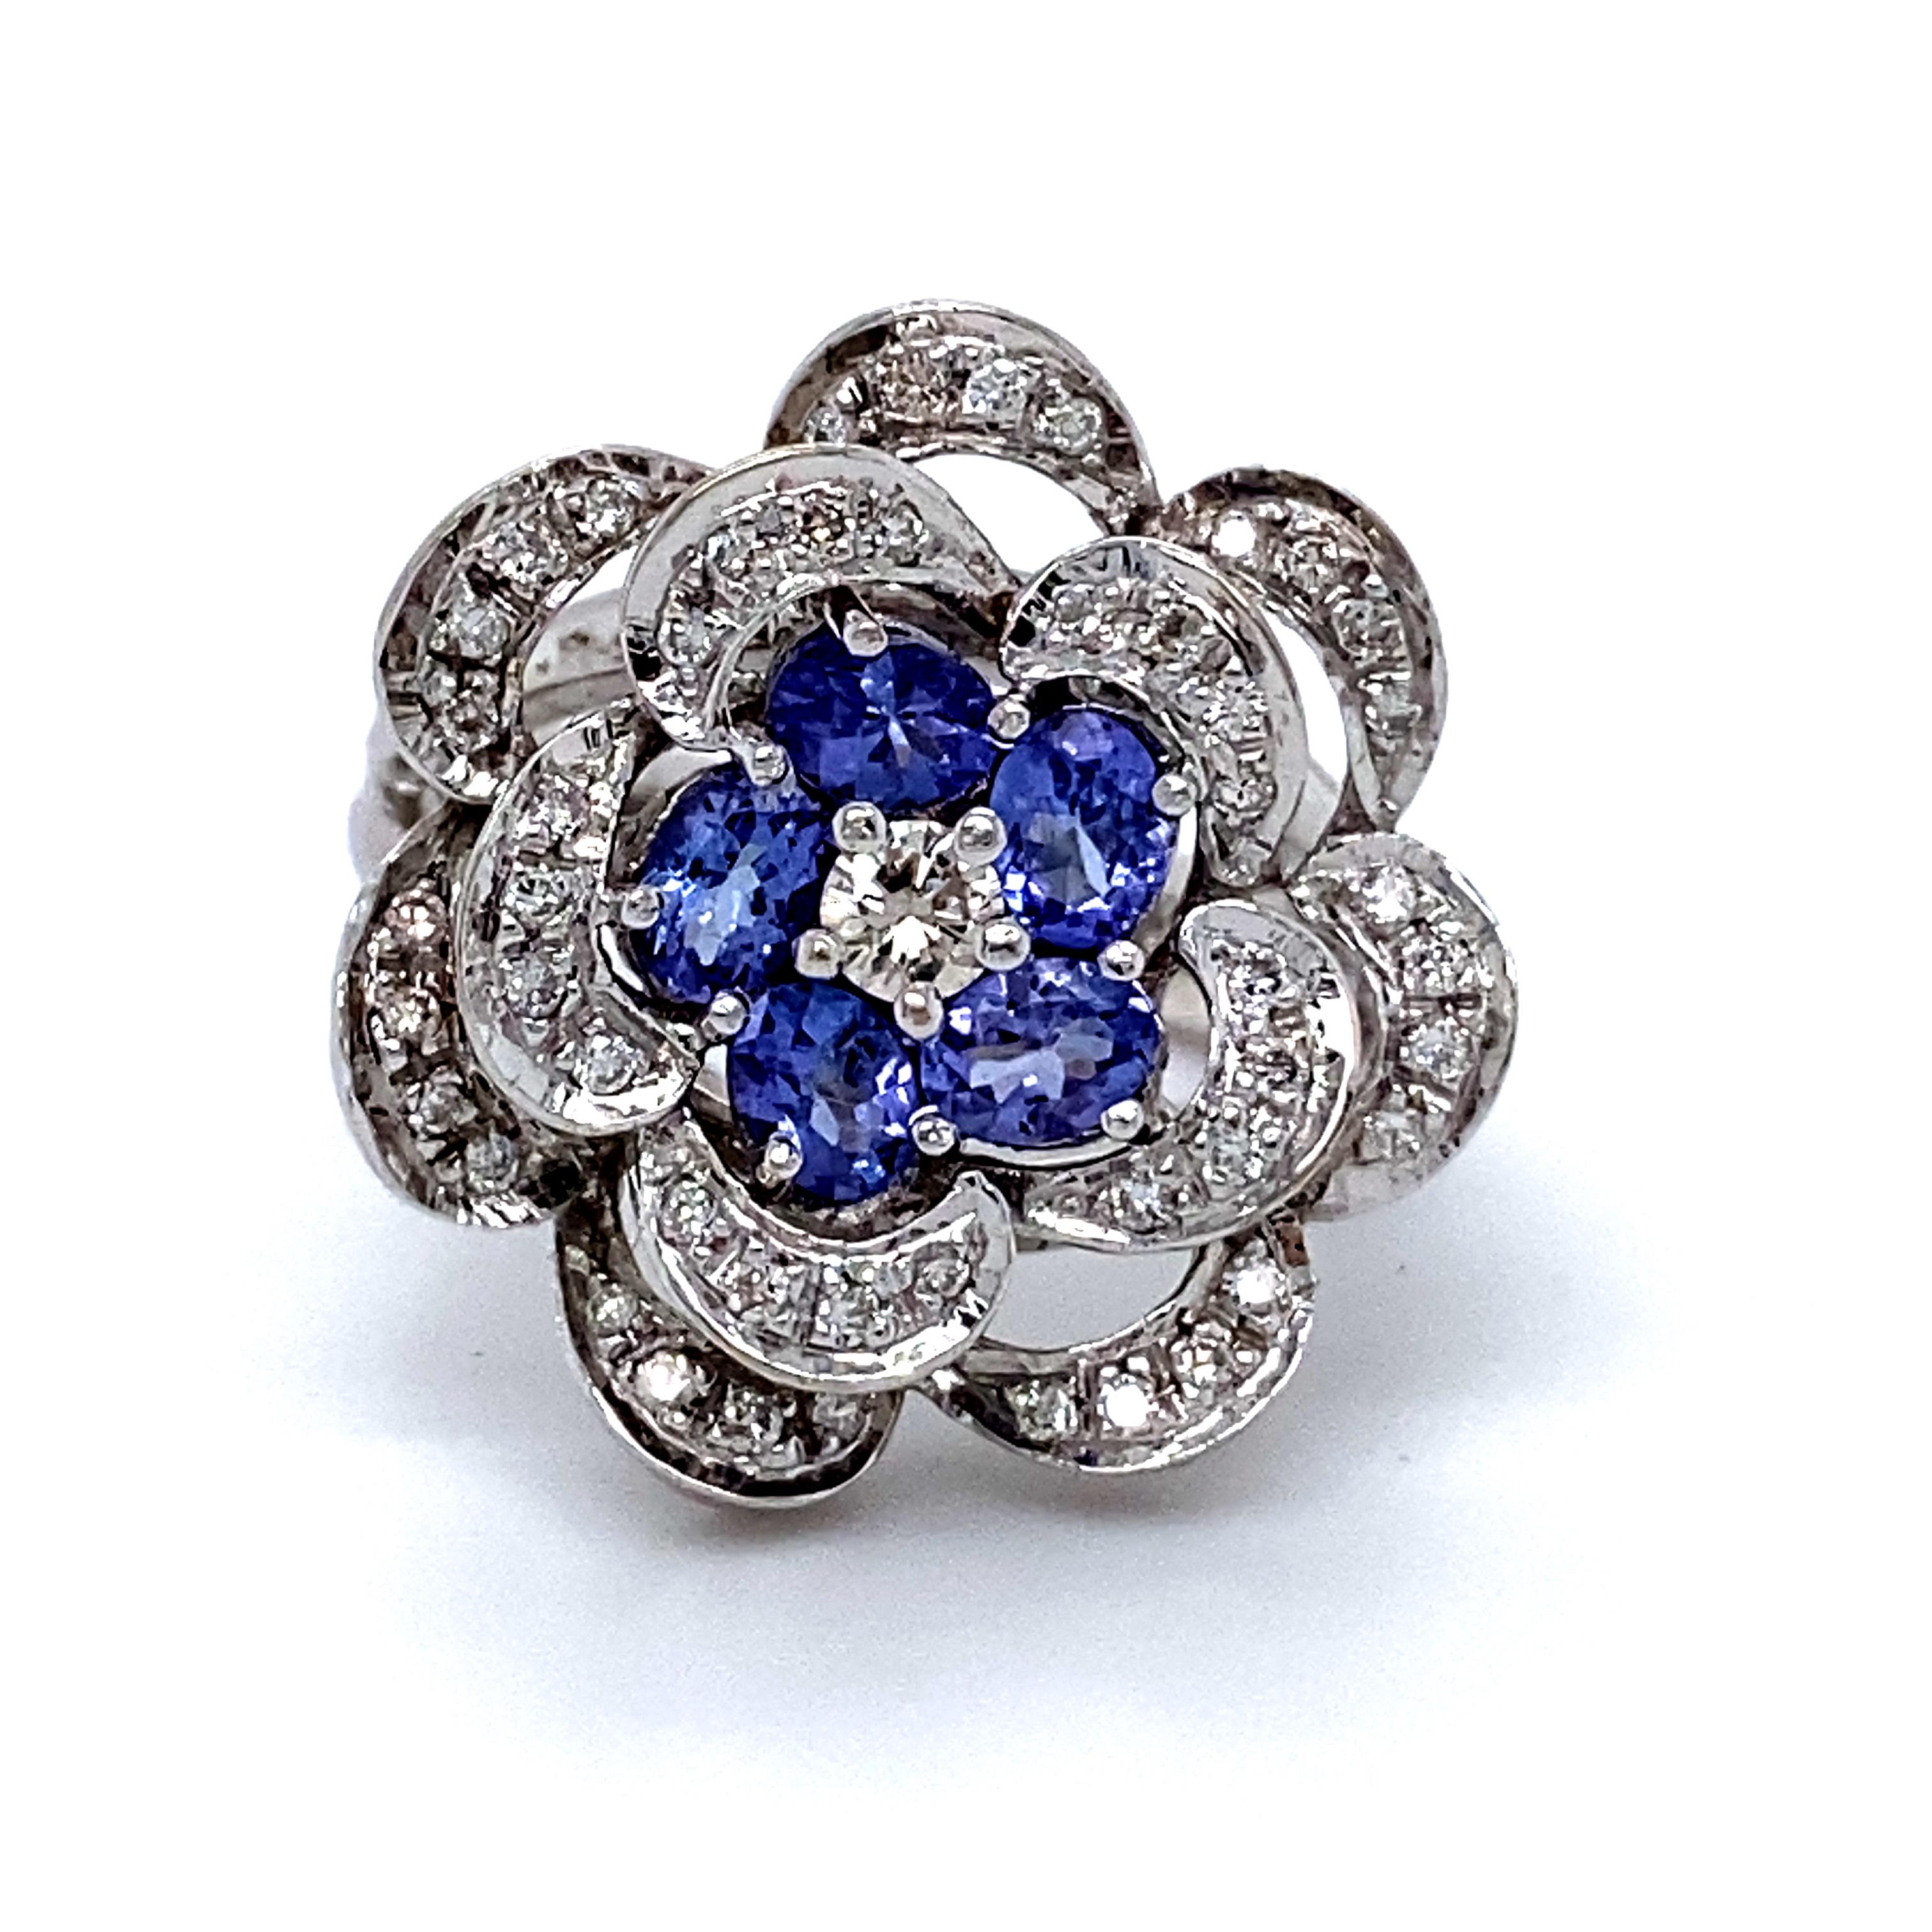 This Beautiful Vintage Diamond and Tanzanite Cluster Ring by Le Vian is so stunning and sparkly I'm temped to keep it for myself. Crafted in 14K White Gold, the design is a beautiful floral cluster, with a diamond center, tanzanite surrounding, and